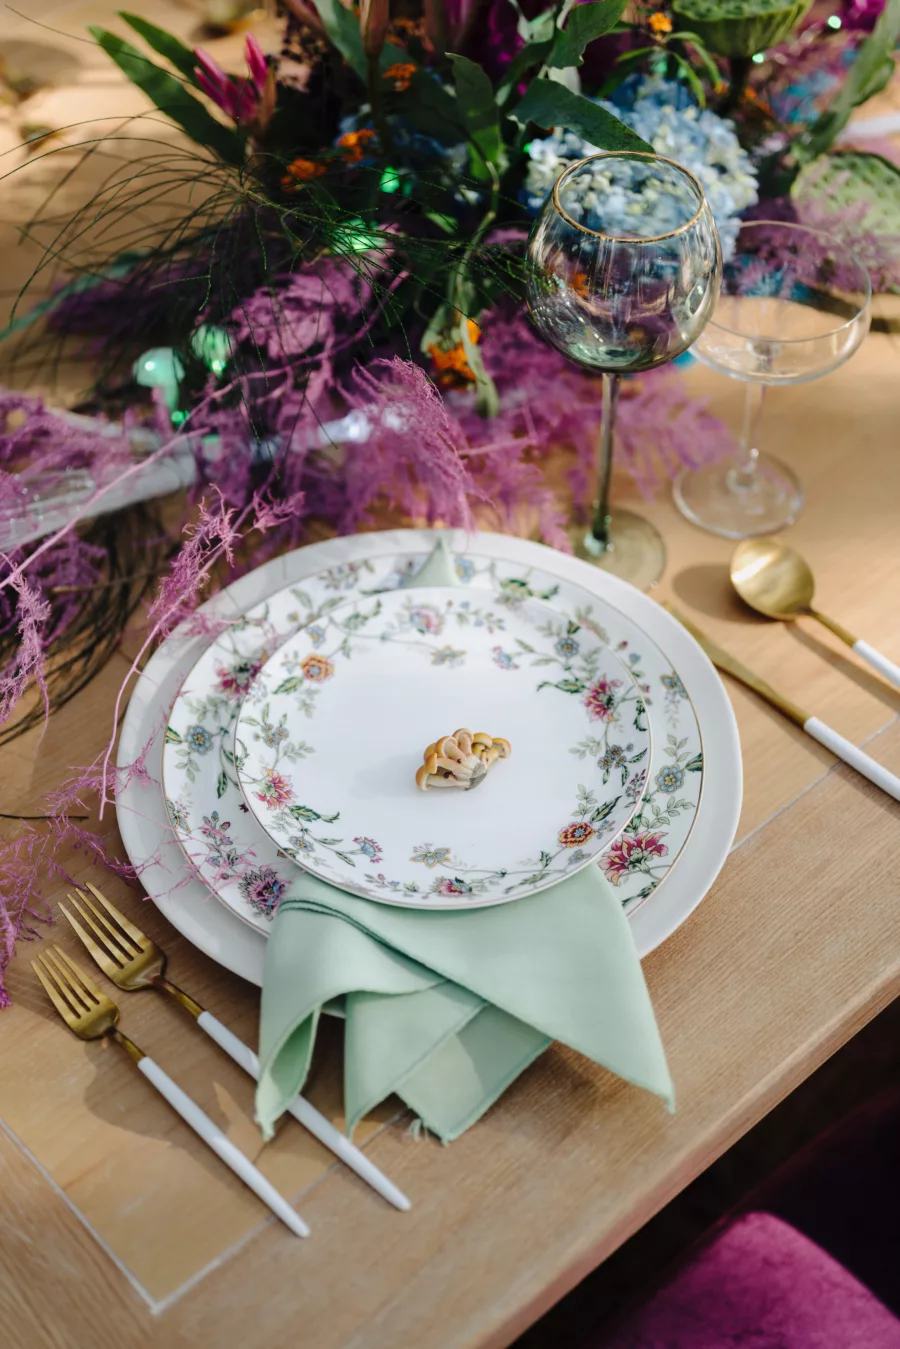 Whimsical Wedding Reception Floral Vintage Place Setting with Mushroom Decor Ideas | Tampa Planner Wilder Mind Events